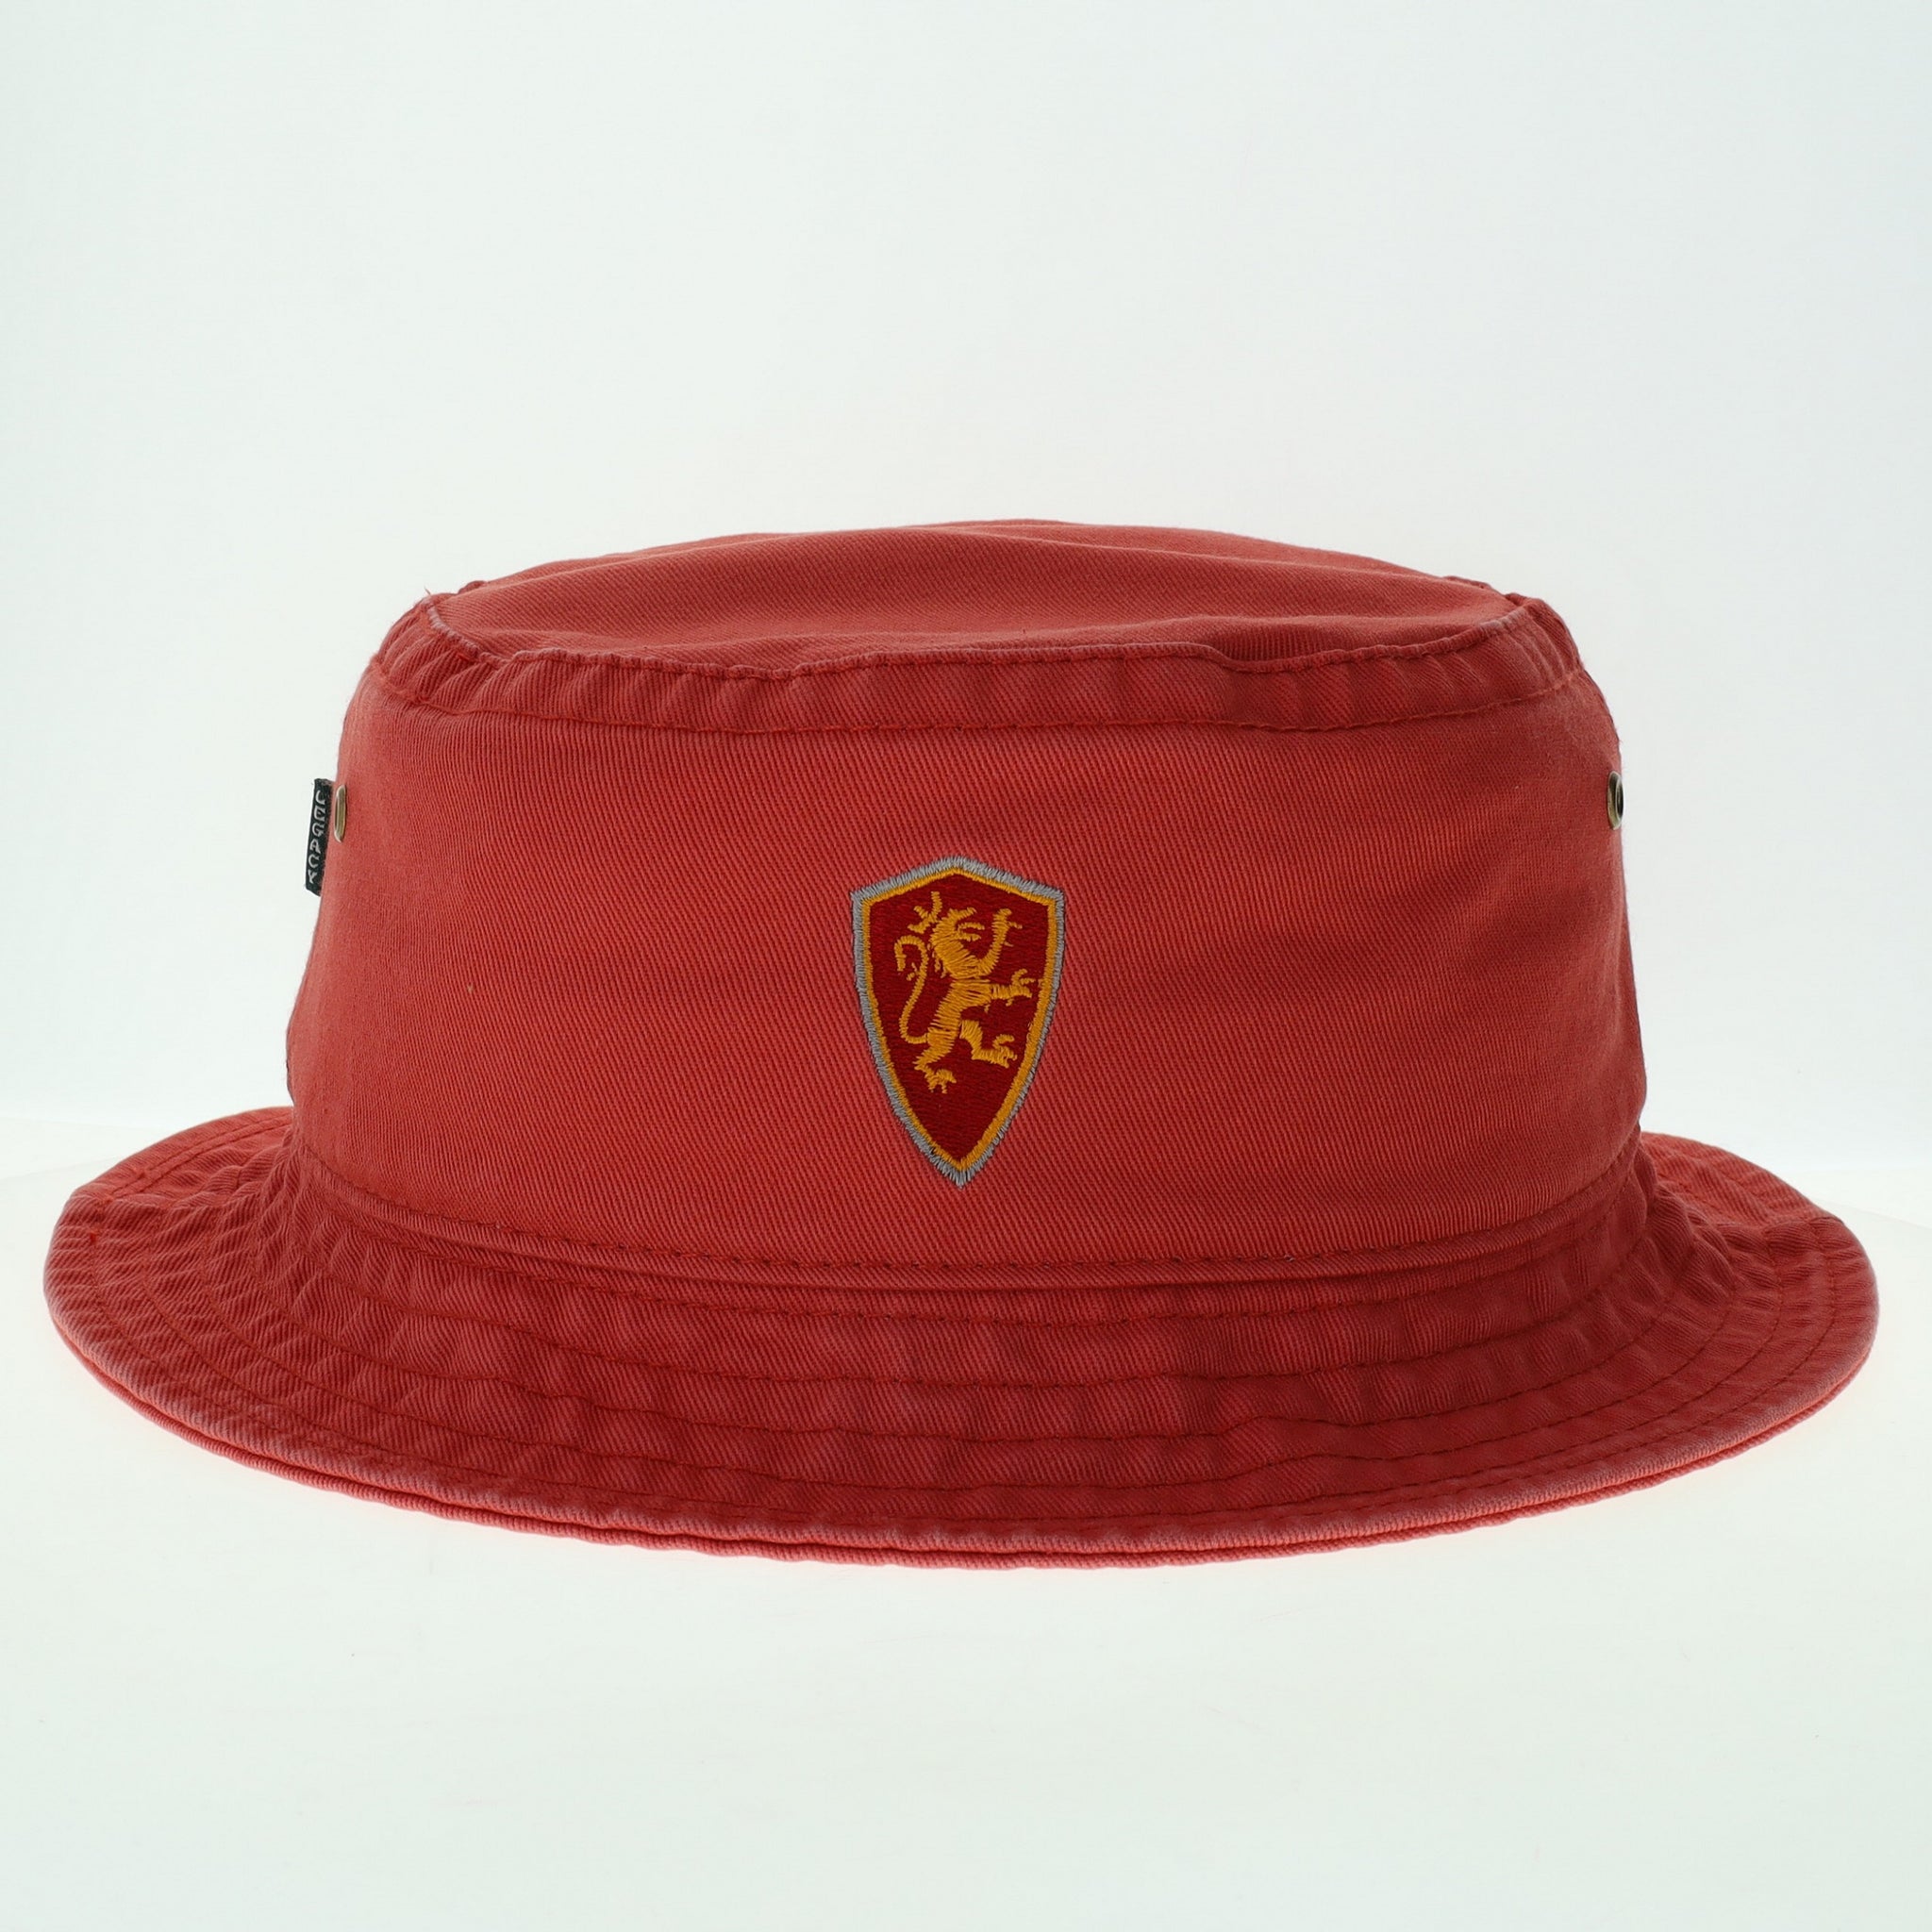 Nantucket red bucket hat with Flagler College shield logo in center